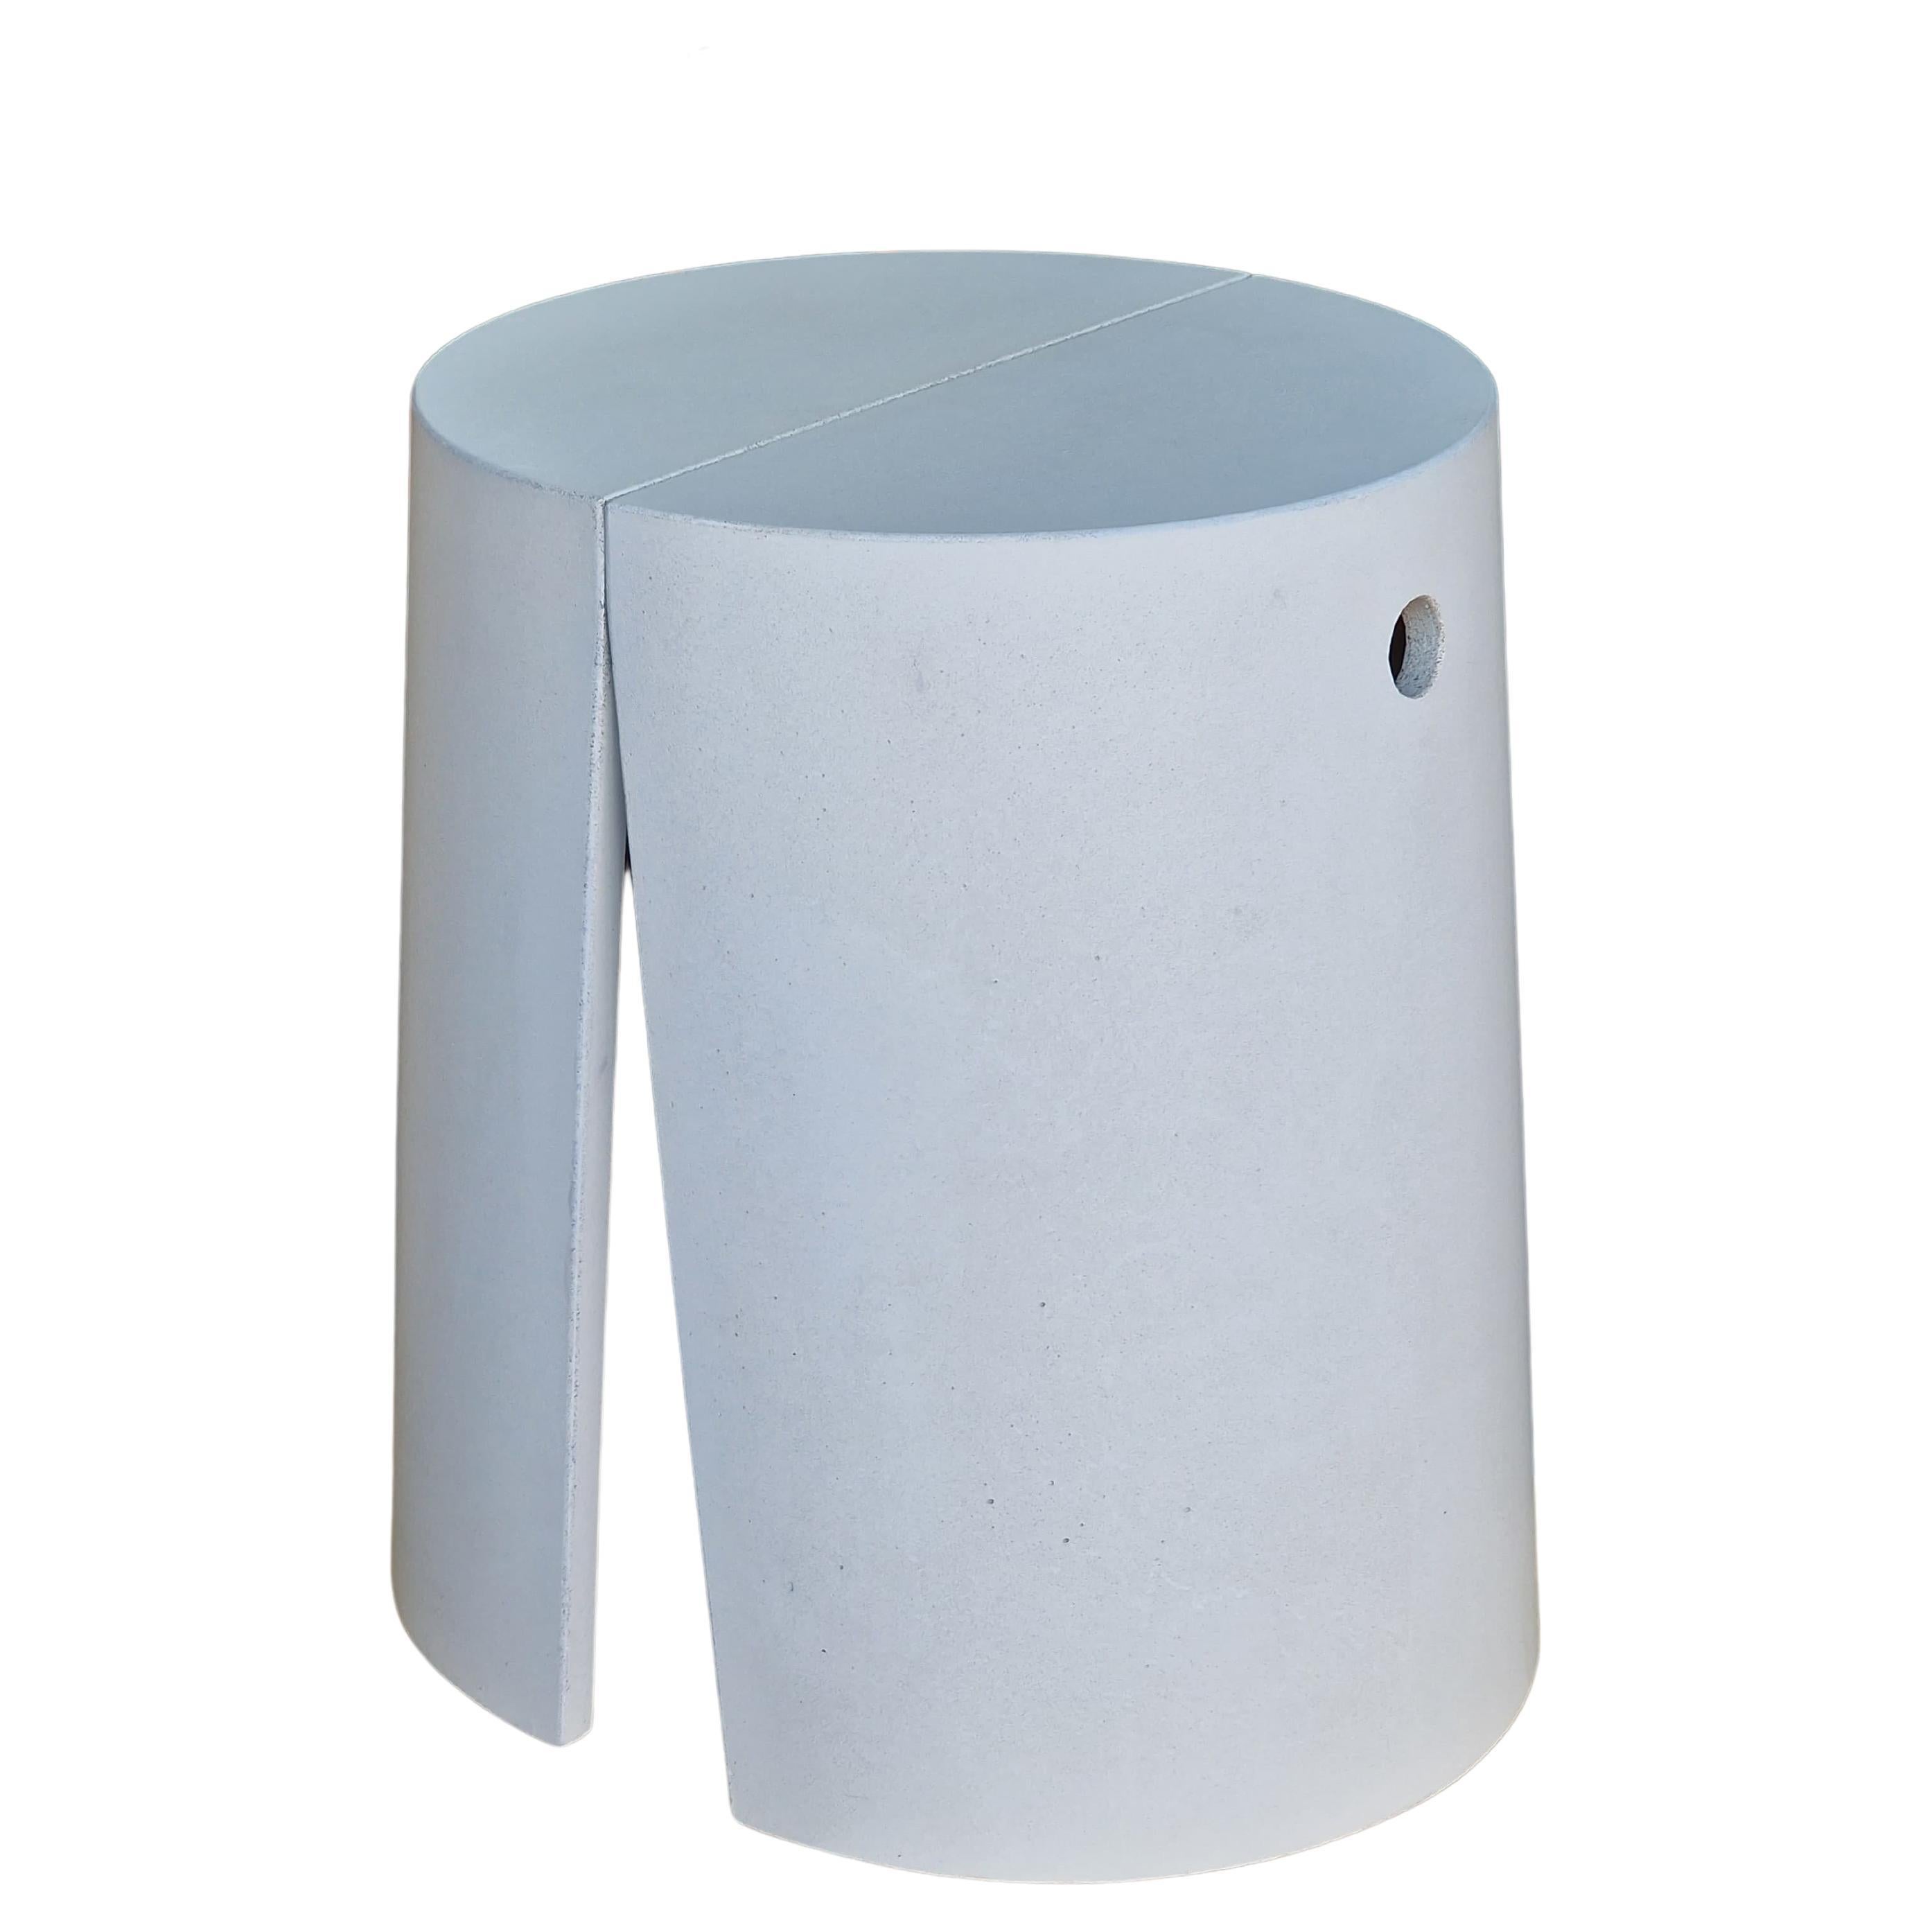 Varco Concrete Stool by Ernesto Messineo in White Shade for Forma&Cemento For Sale